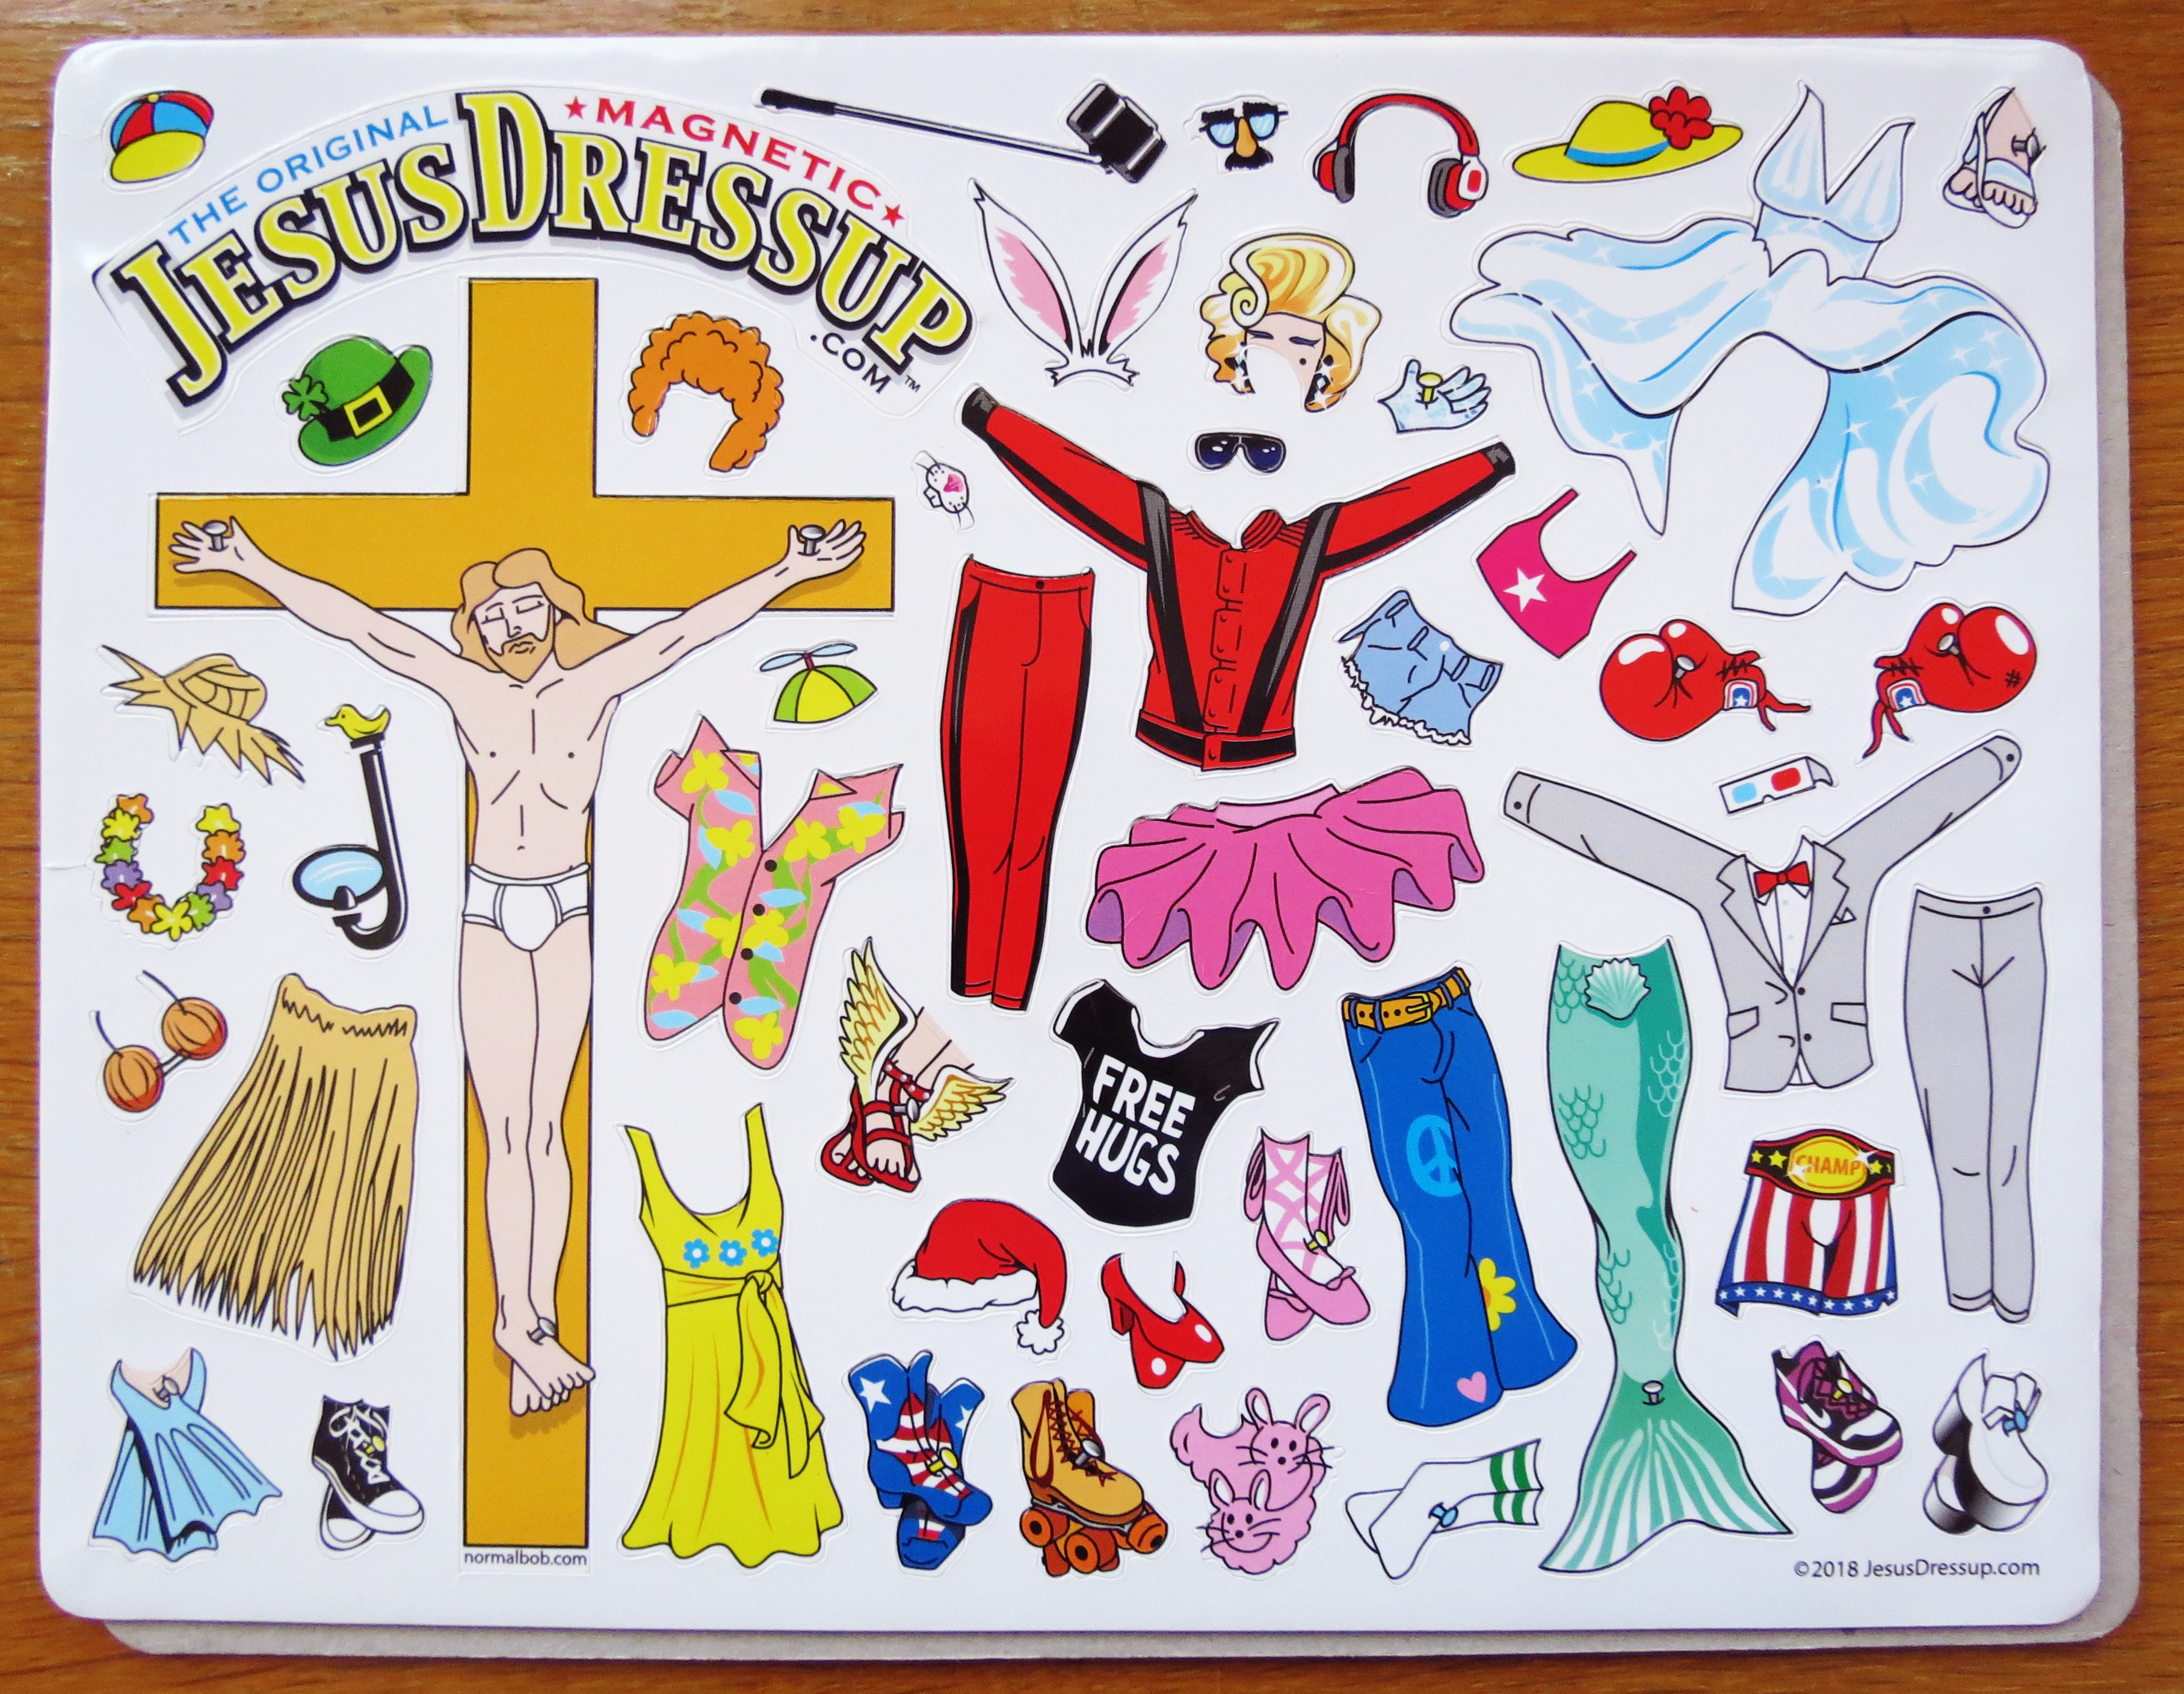 First sample of the new Original Jesus Dressup magnet set. The tightest die cut & most dress items on a set ever!